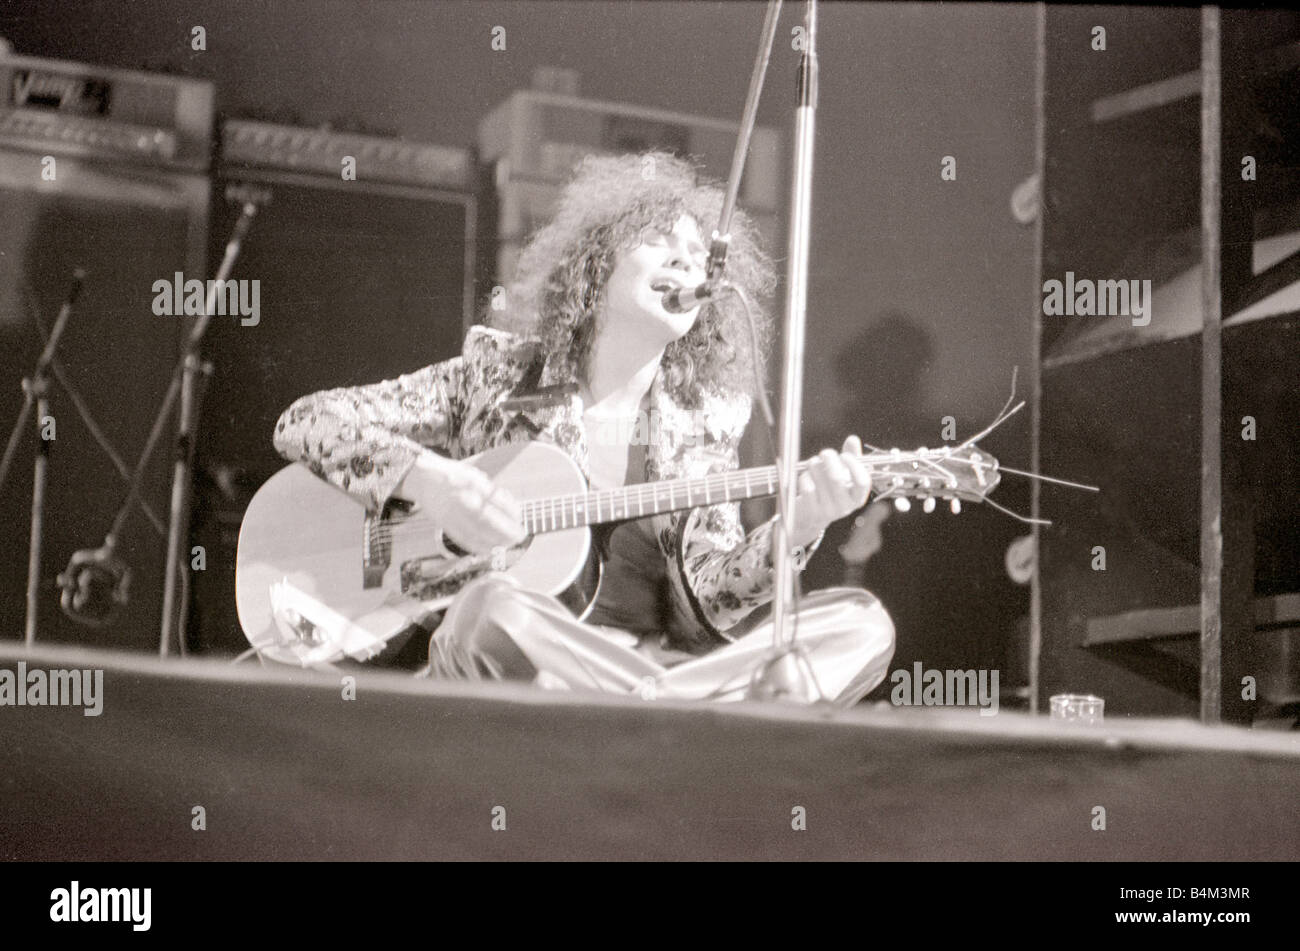 Marc Bolan in concert at th Empire Pool Wembley Sitting on stage cross legged playing the guitar and singing into the microphone eyes closed Pop Concert T Rex Ringo Starr was present at the gig 72 3455 18 03 1972 1970s Marsh Mirrorpix Stock Photo